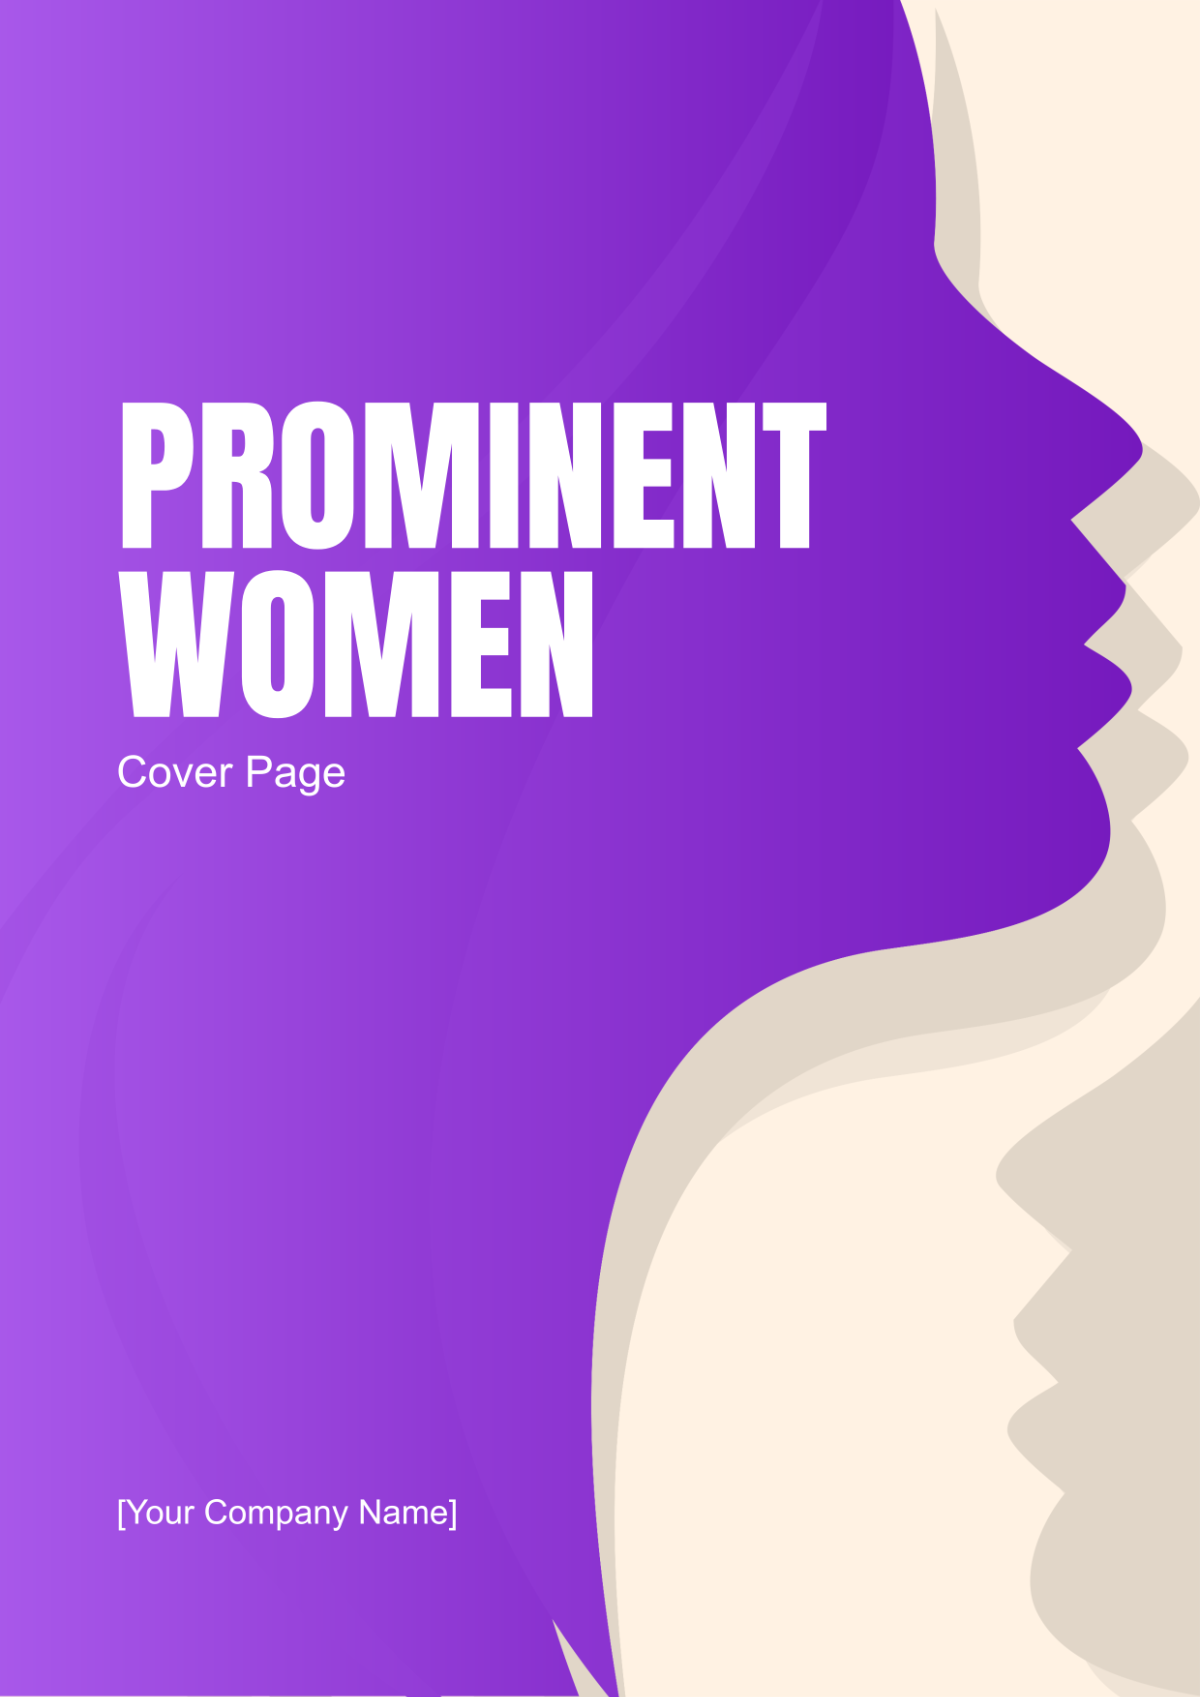 Prominent Women Cover Page Template